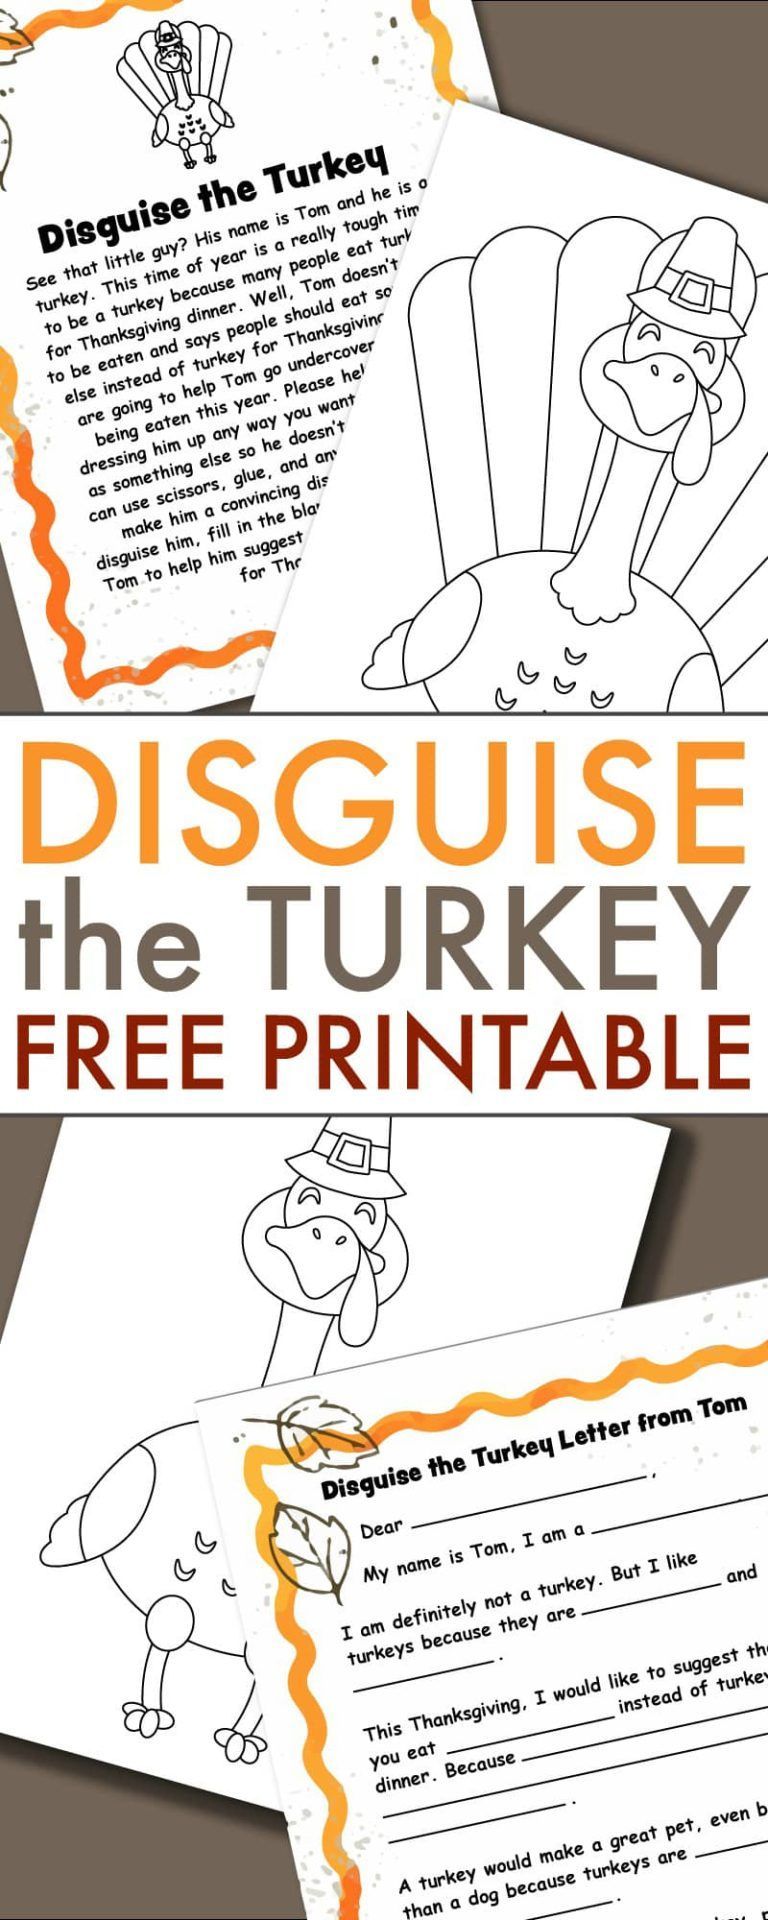 A Turkey in Disguise Project Free Printable Template -   17 turkey disguise project kindergartens template ideas